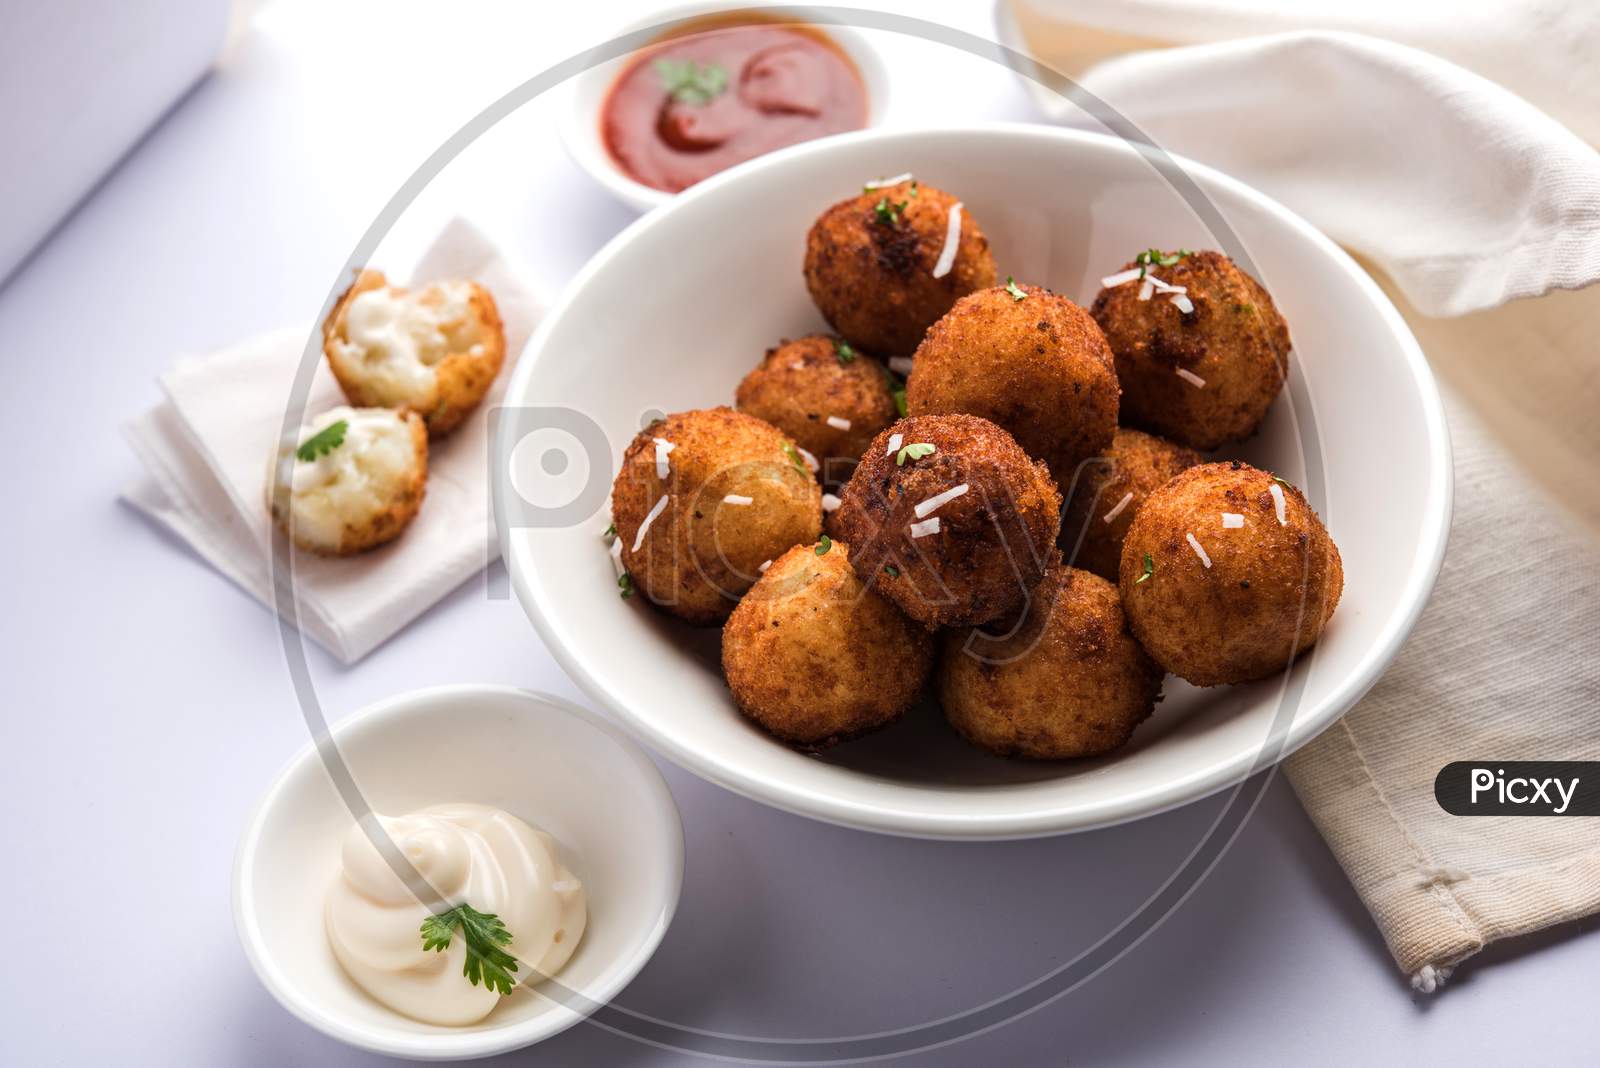 Fried potato cheese balls or croquettes